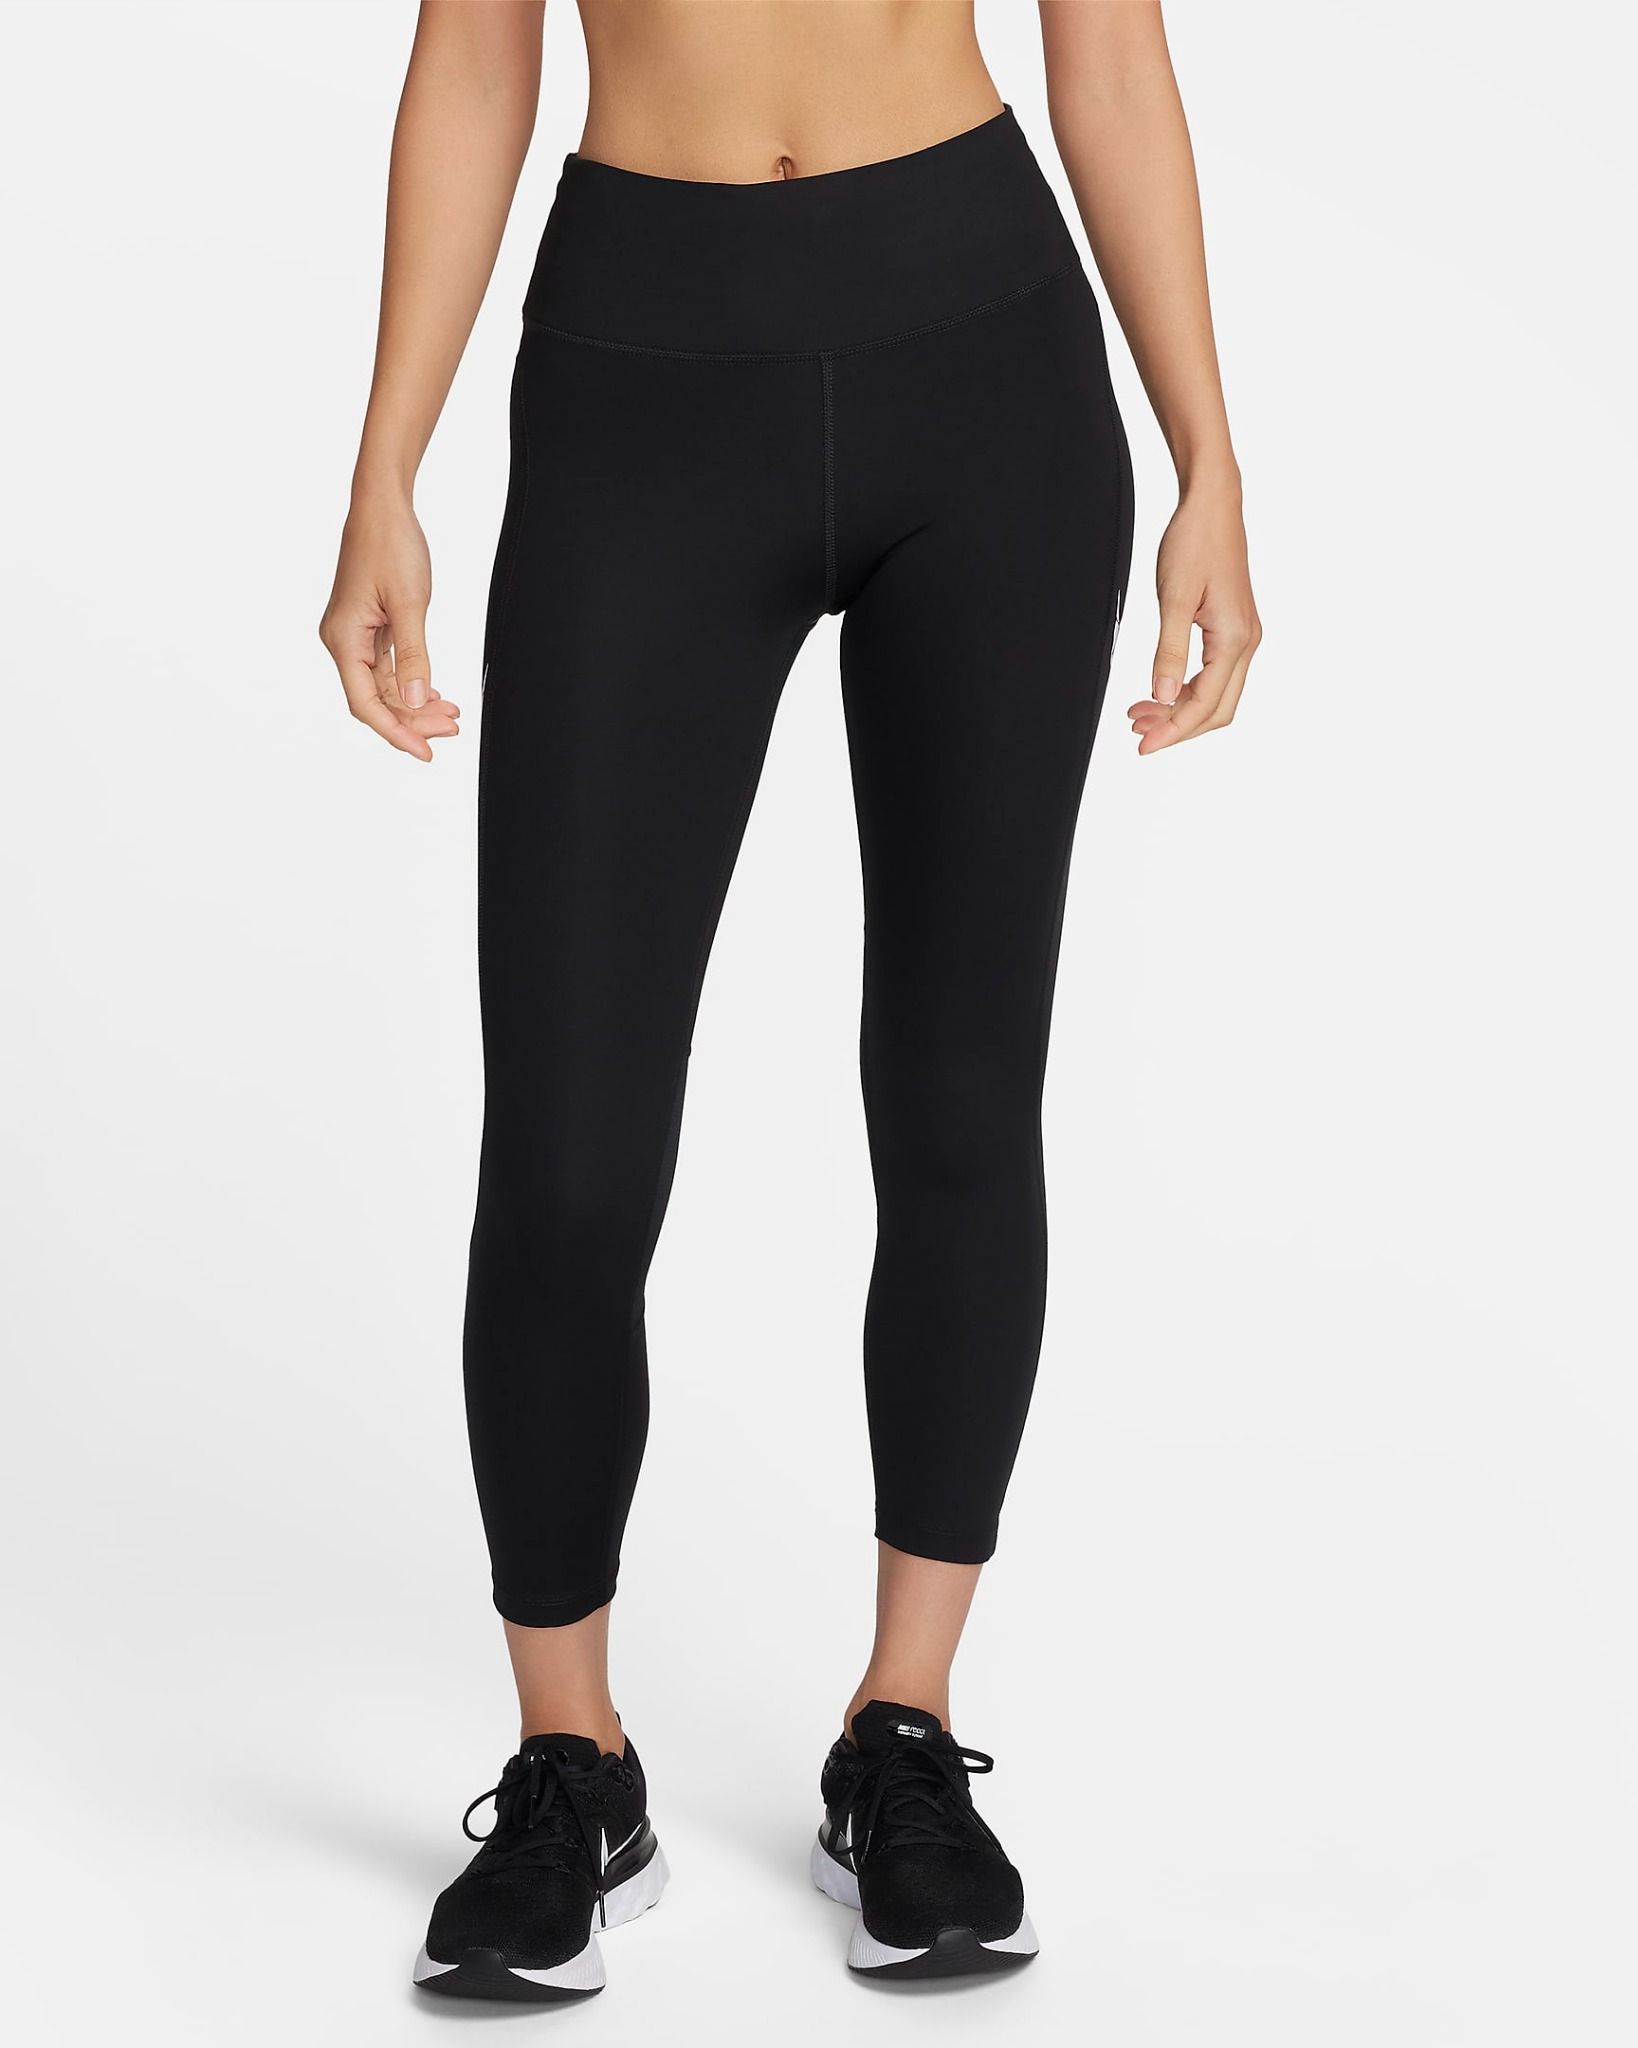 Nike - Quần dài thể thao Nữ Fast Women's Mid-Rise 7/8 Running Leggings with Pockets